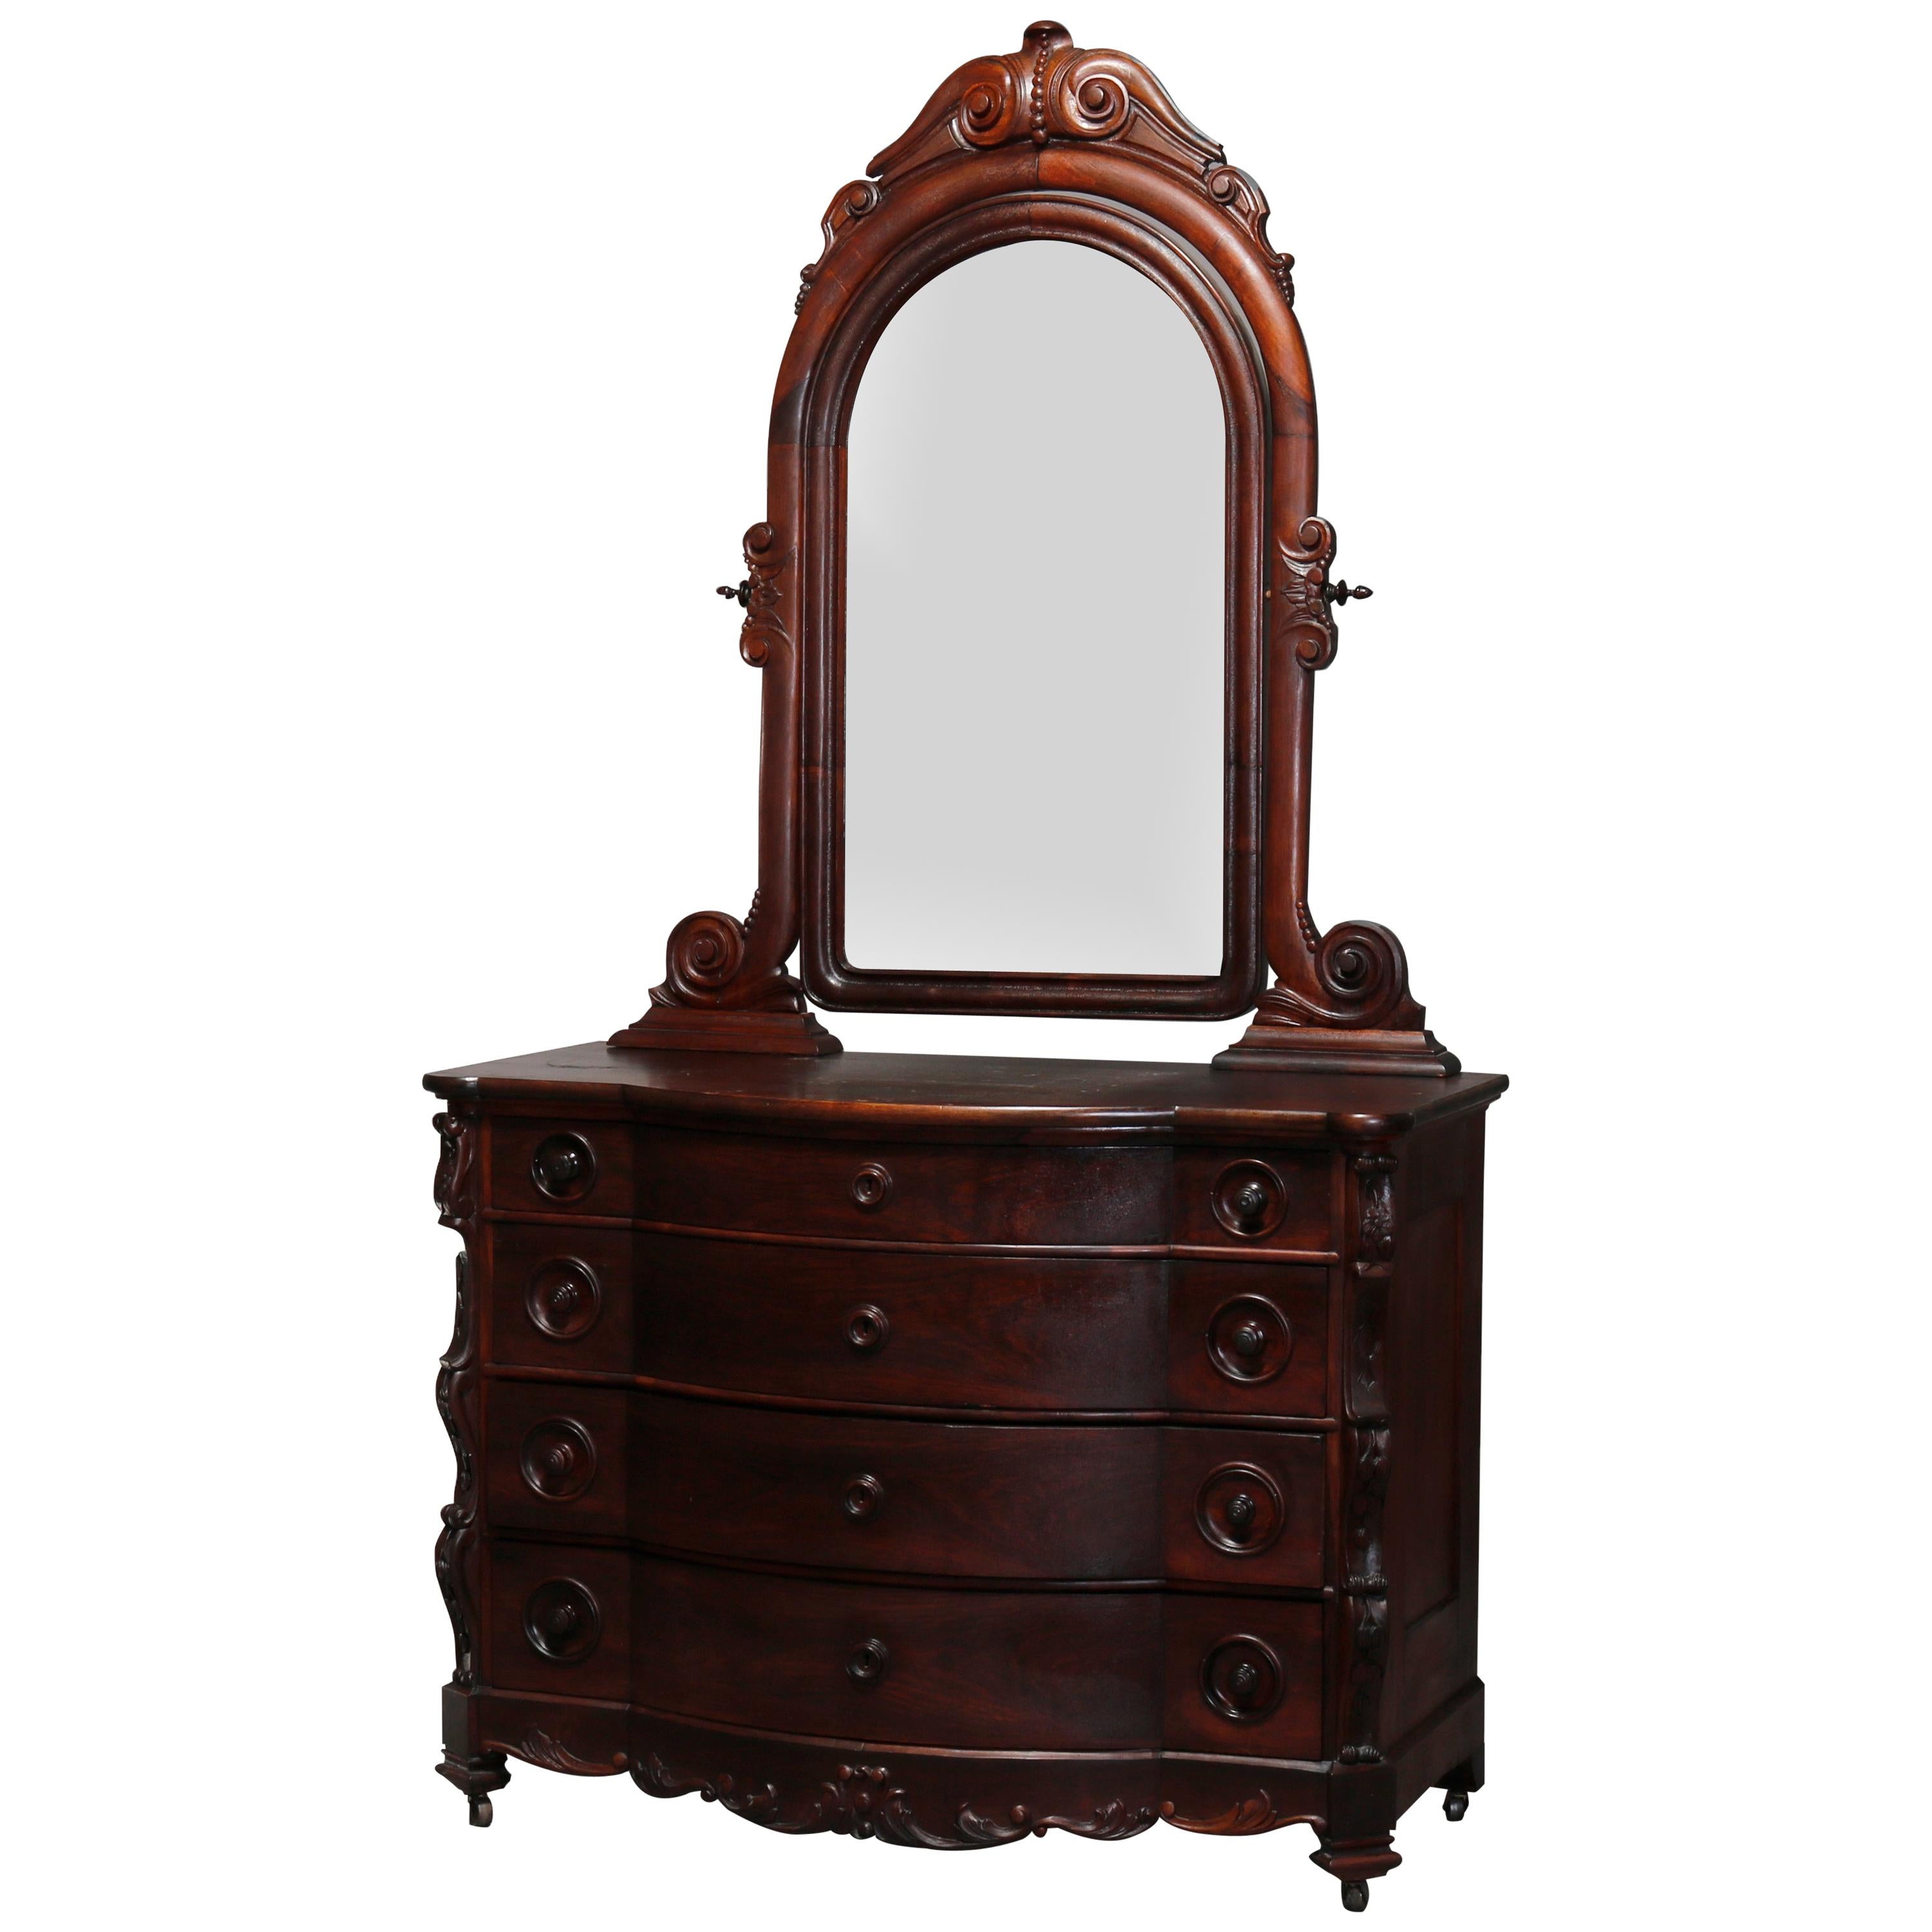 Antique Rococo Revival Carved Rosewood Mirrored Dresser, circa 1860